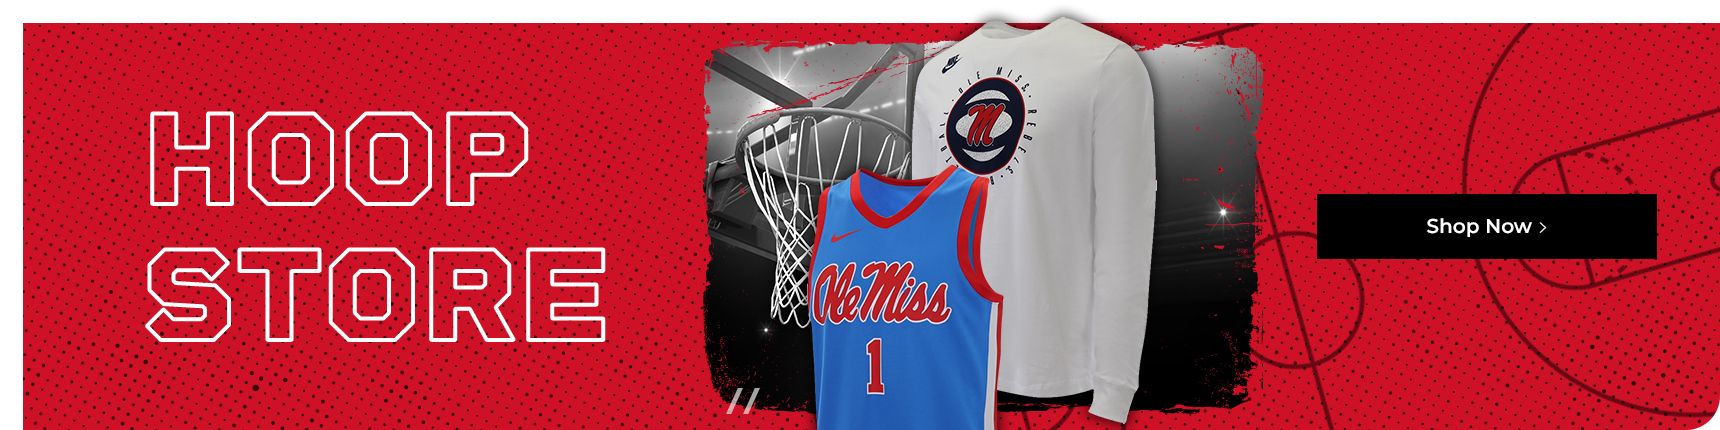 Official Team Shop of Ole Miss Athletics Apparel, Gear